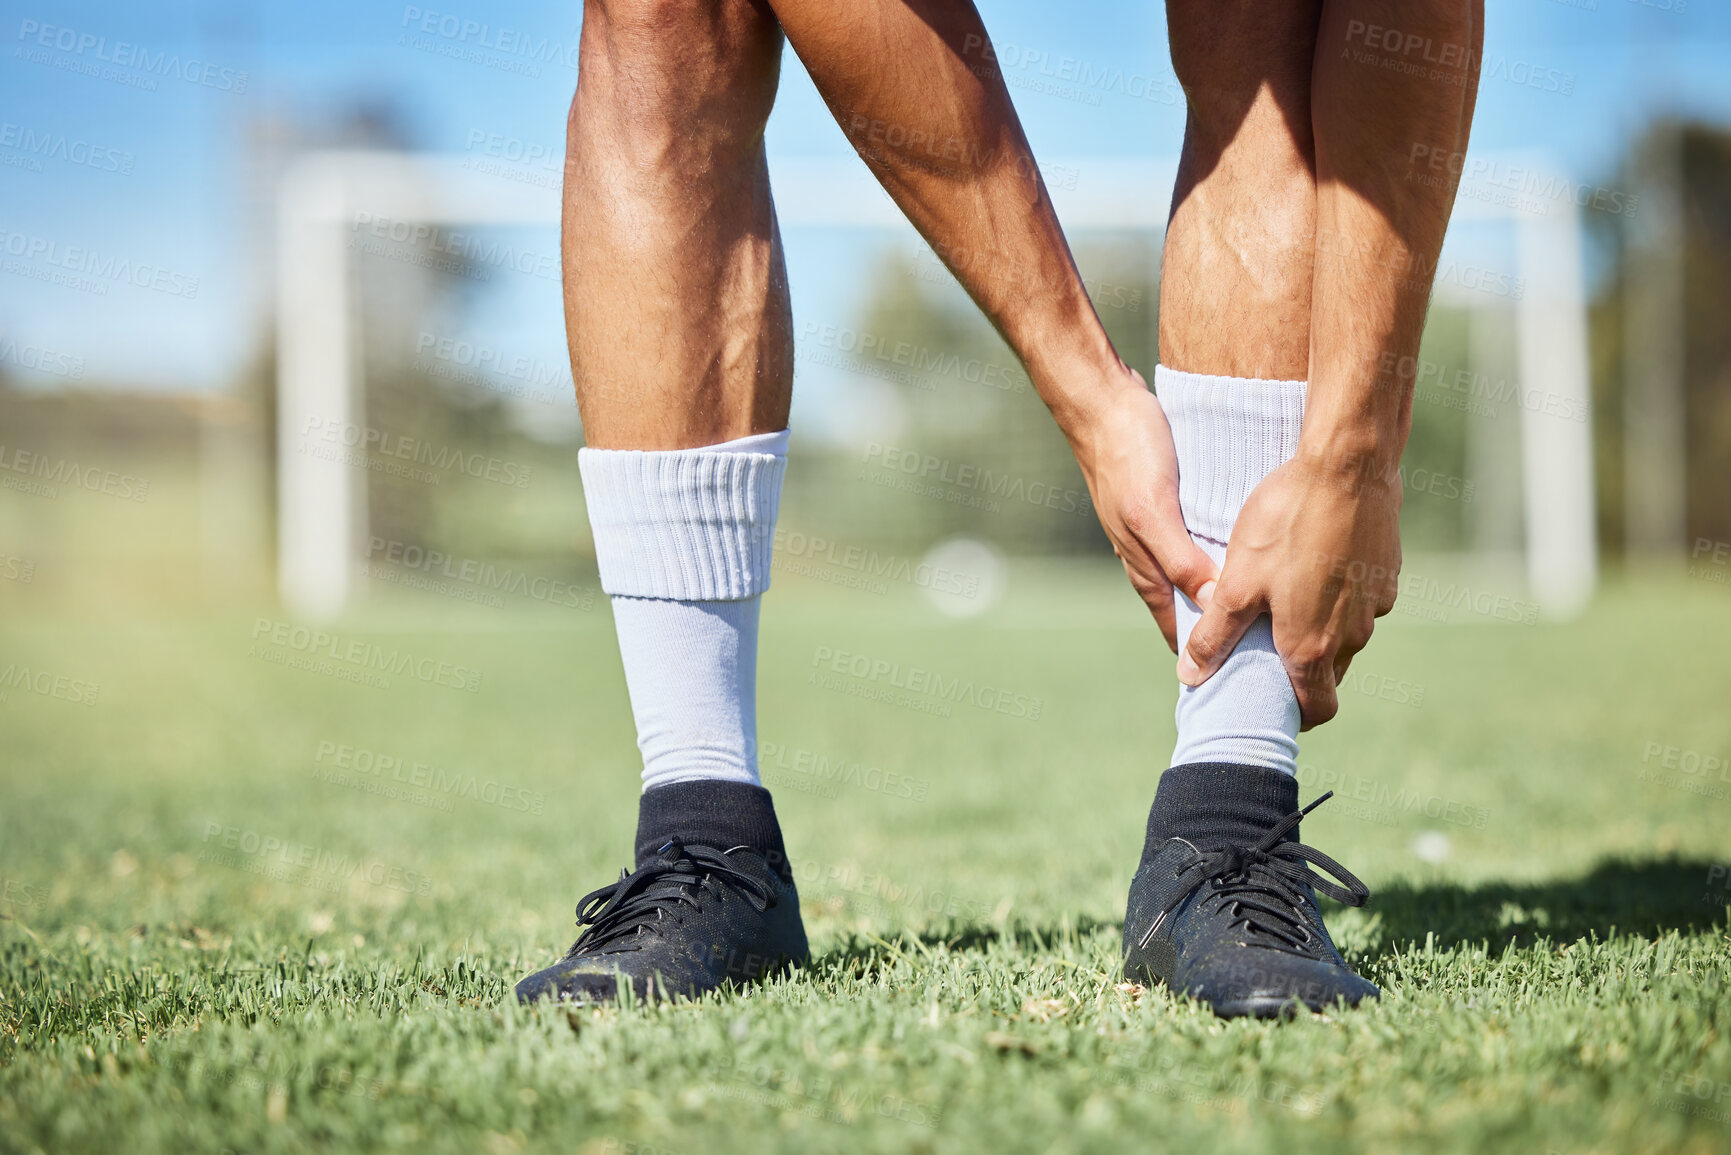 Buy stock photo Sports, soccer and ankle injury on grass with self assessment of physical pain at athlete game. Hurt, injured and joint discomfort of football man on field checking painful leg at competition.

